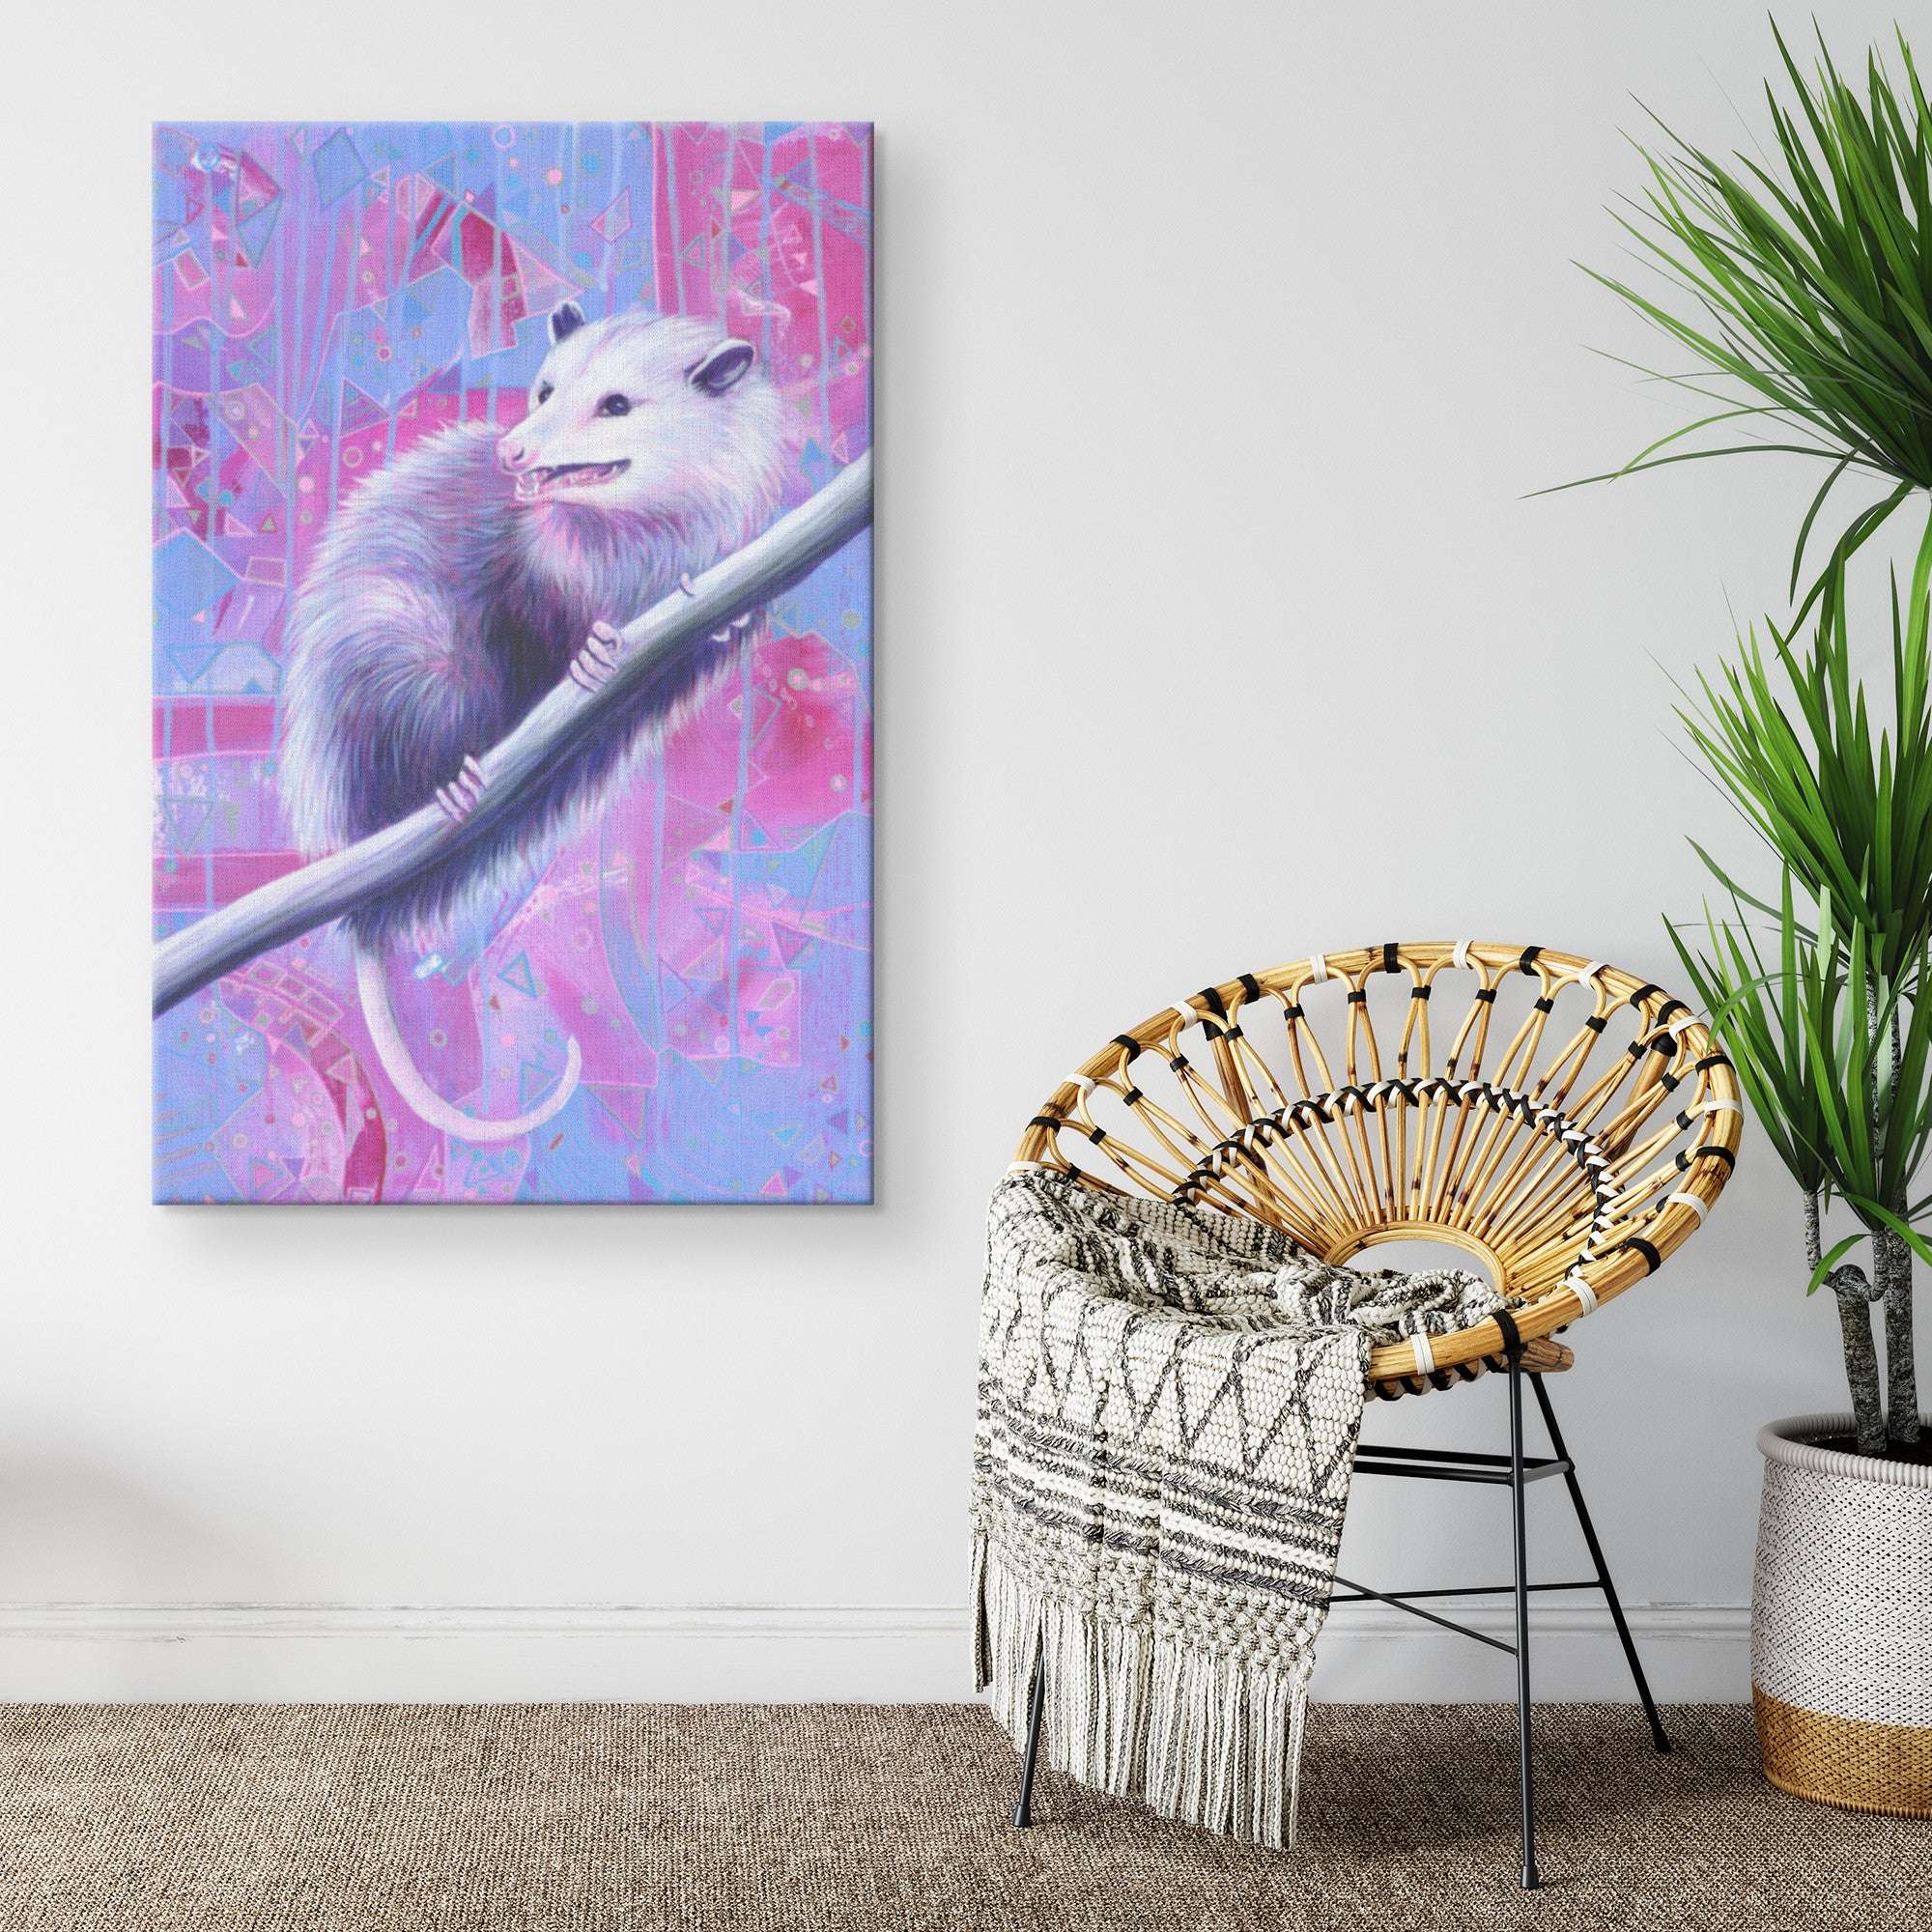 Colorful painting of an Opossum Canvas Print on a branch, set against a graffiti-style background, hanging in a modern room next to a wicker chair with a patterned blanket.